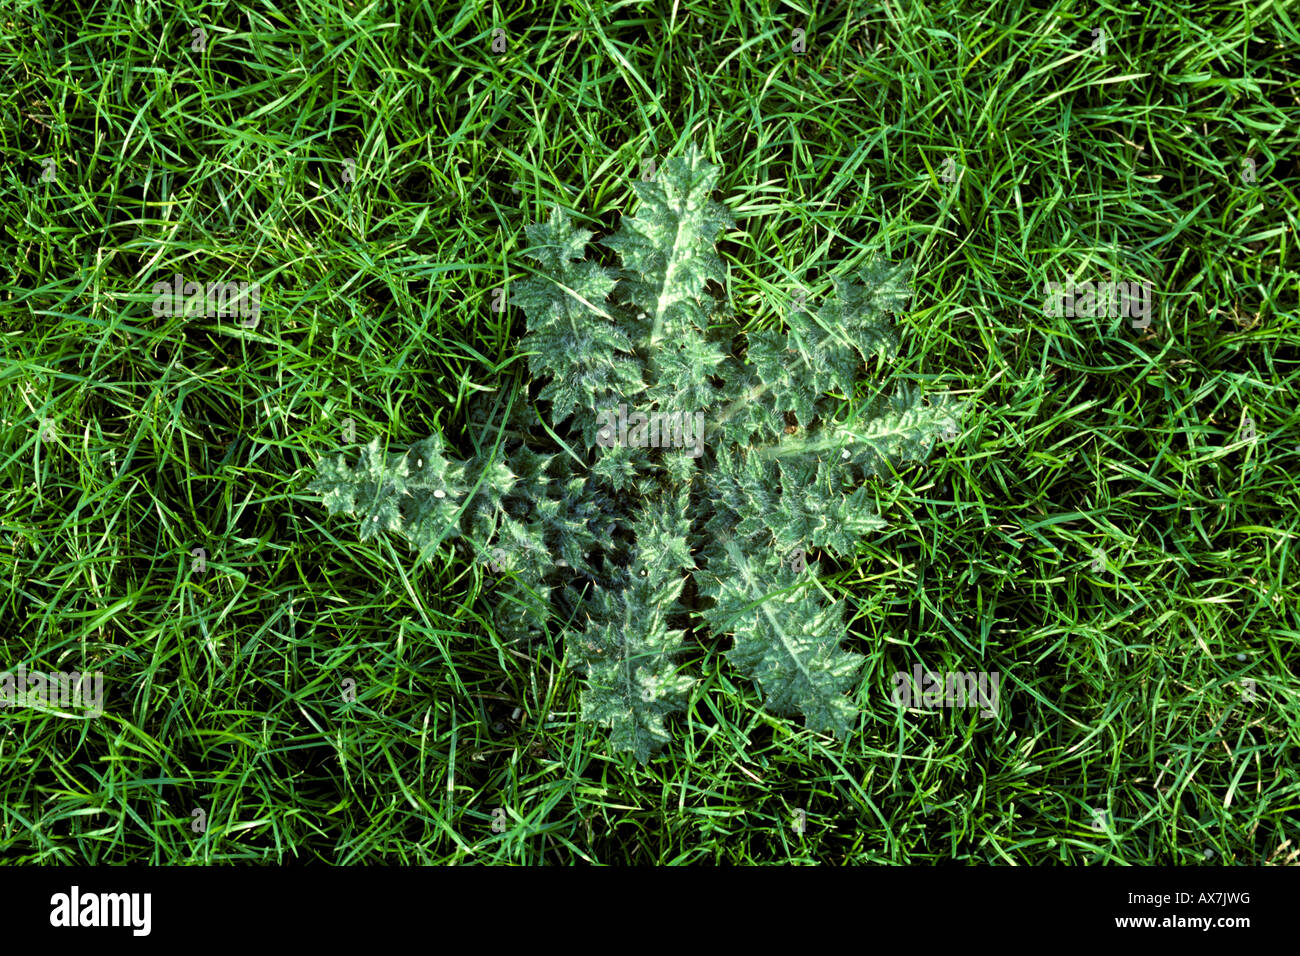 Spear thistle Cirsium vulgare plant rosette in ryegrass ley Stock Photo